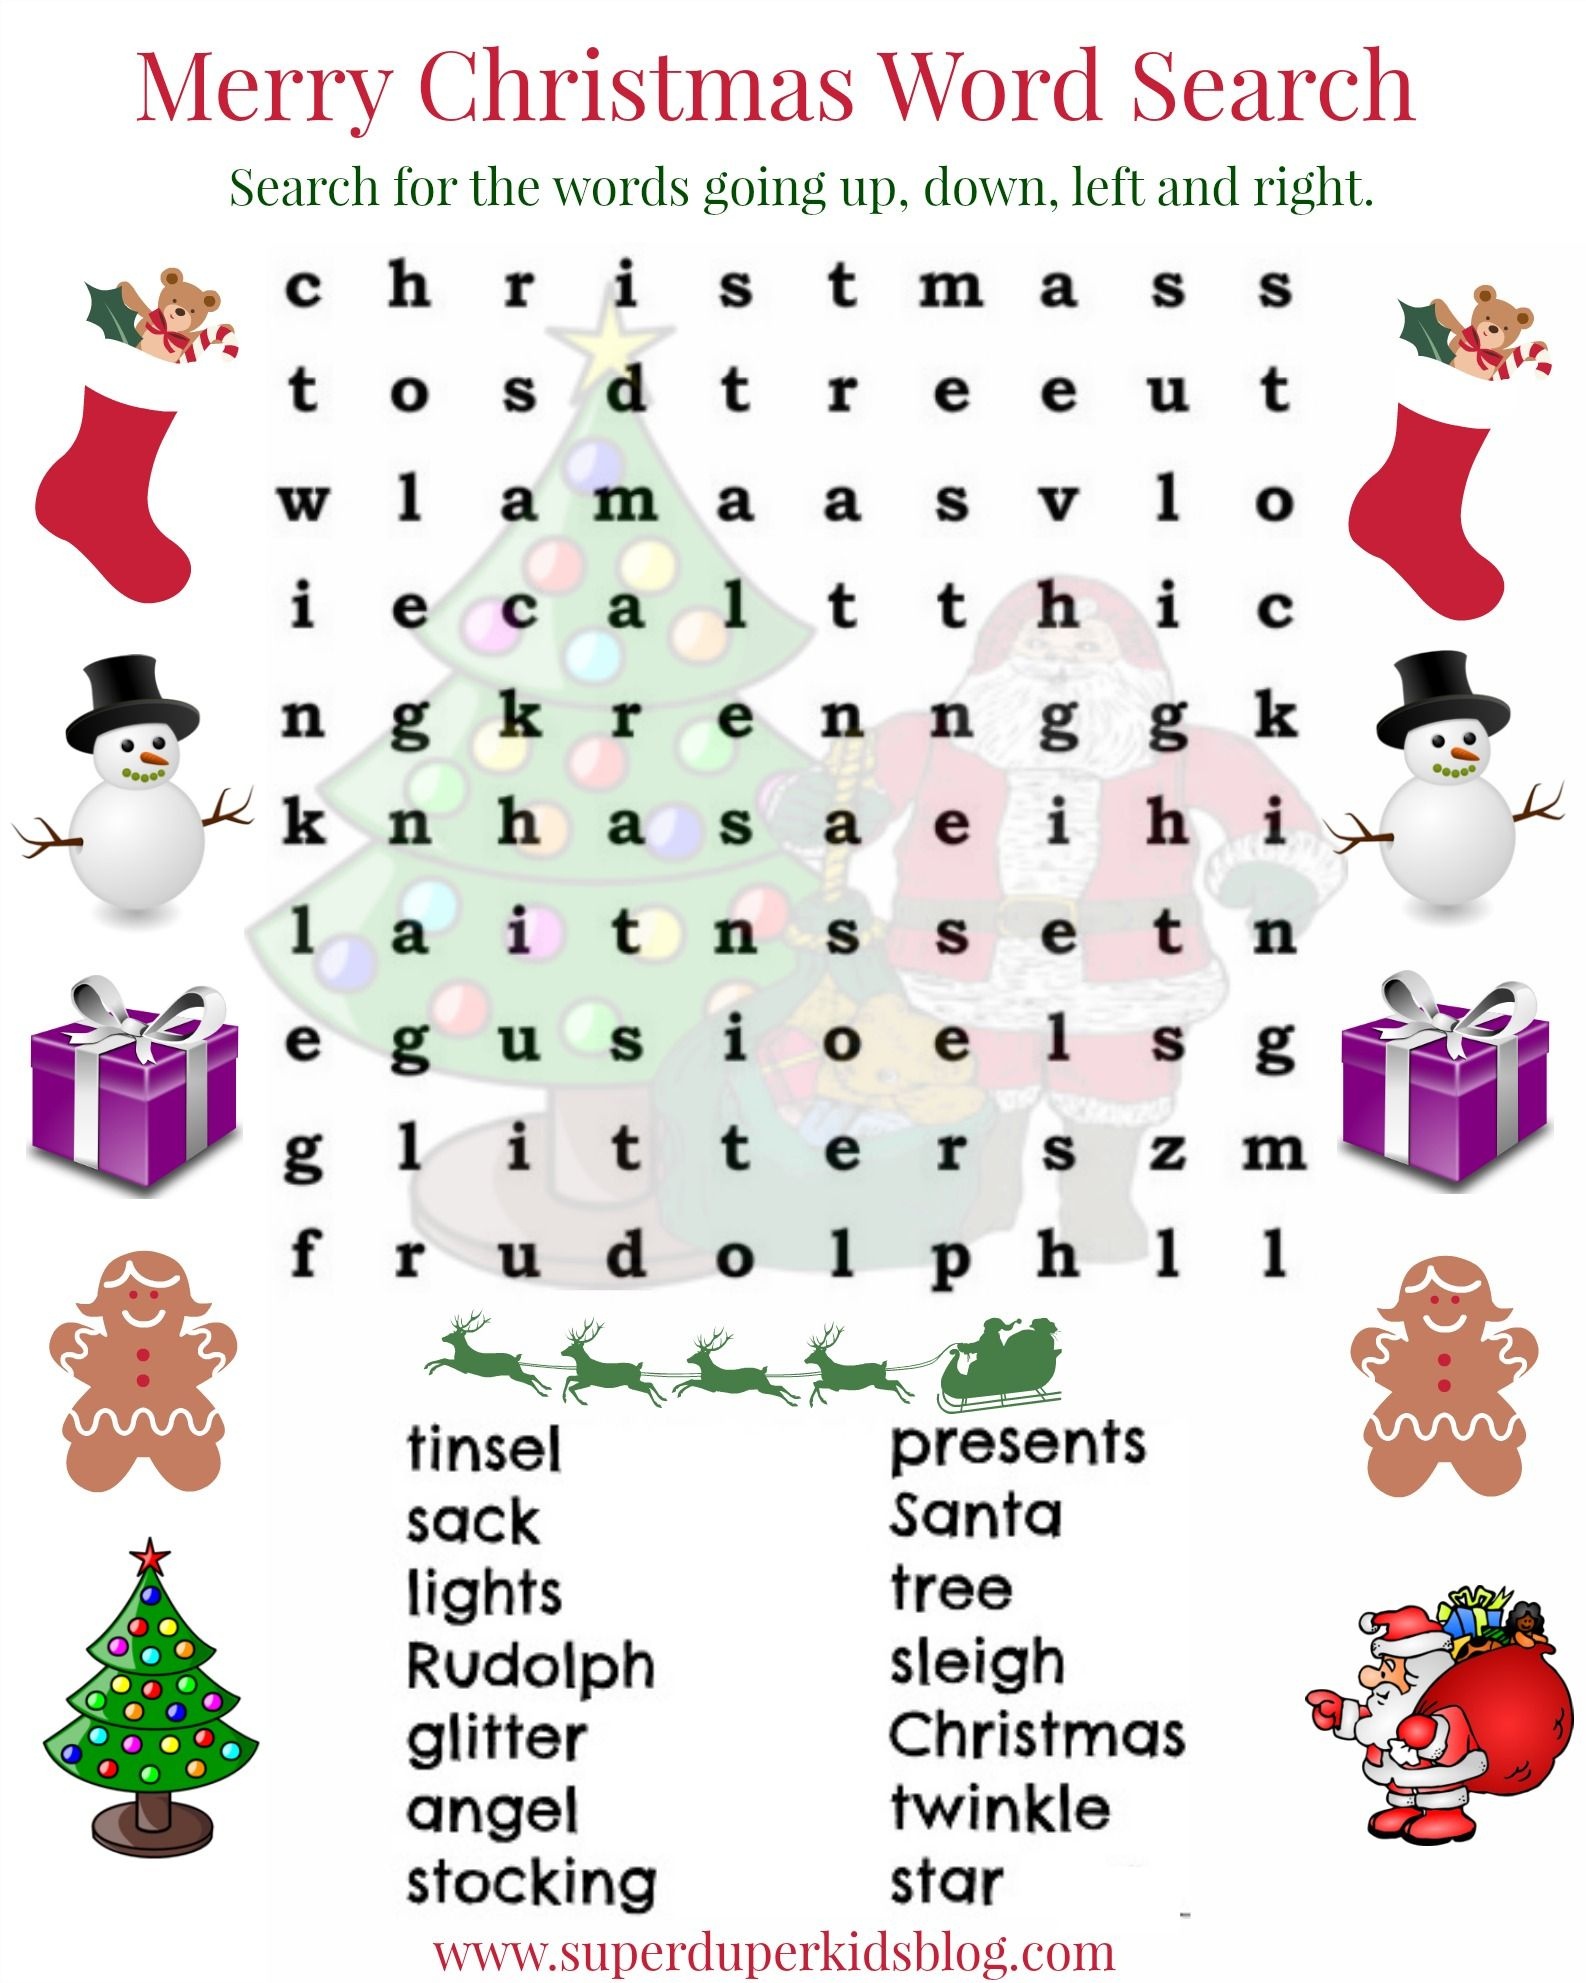 Pinsuperduperkidsblog On Free Printables | Christmas Word Search - Christmas Find A Word Printable Free